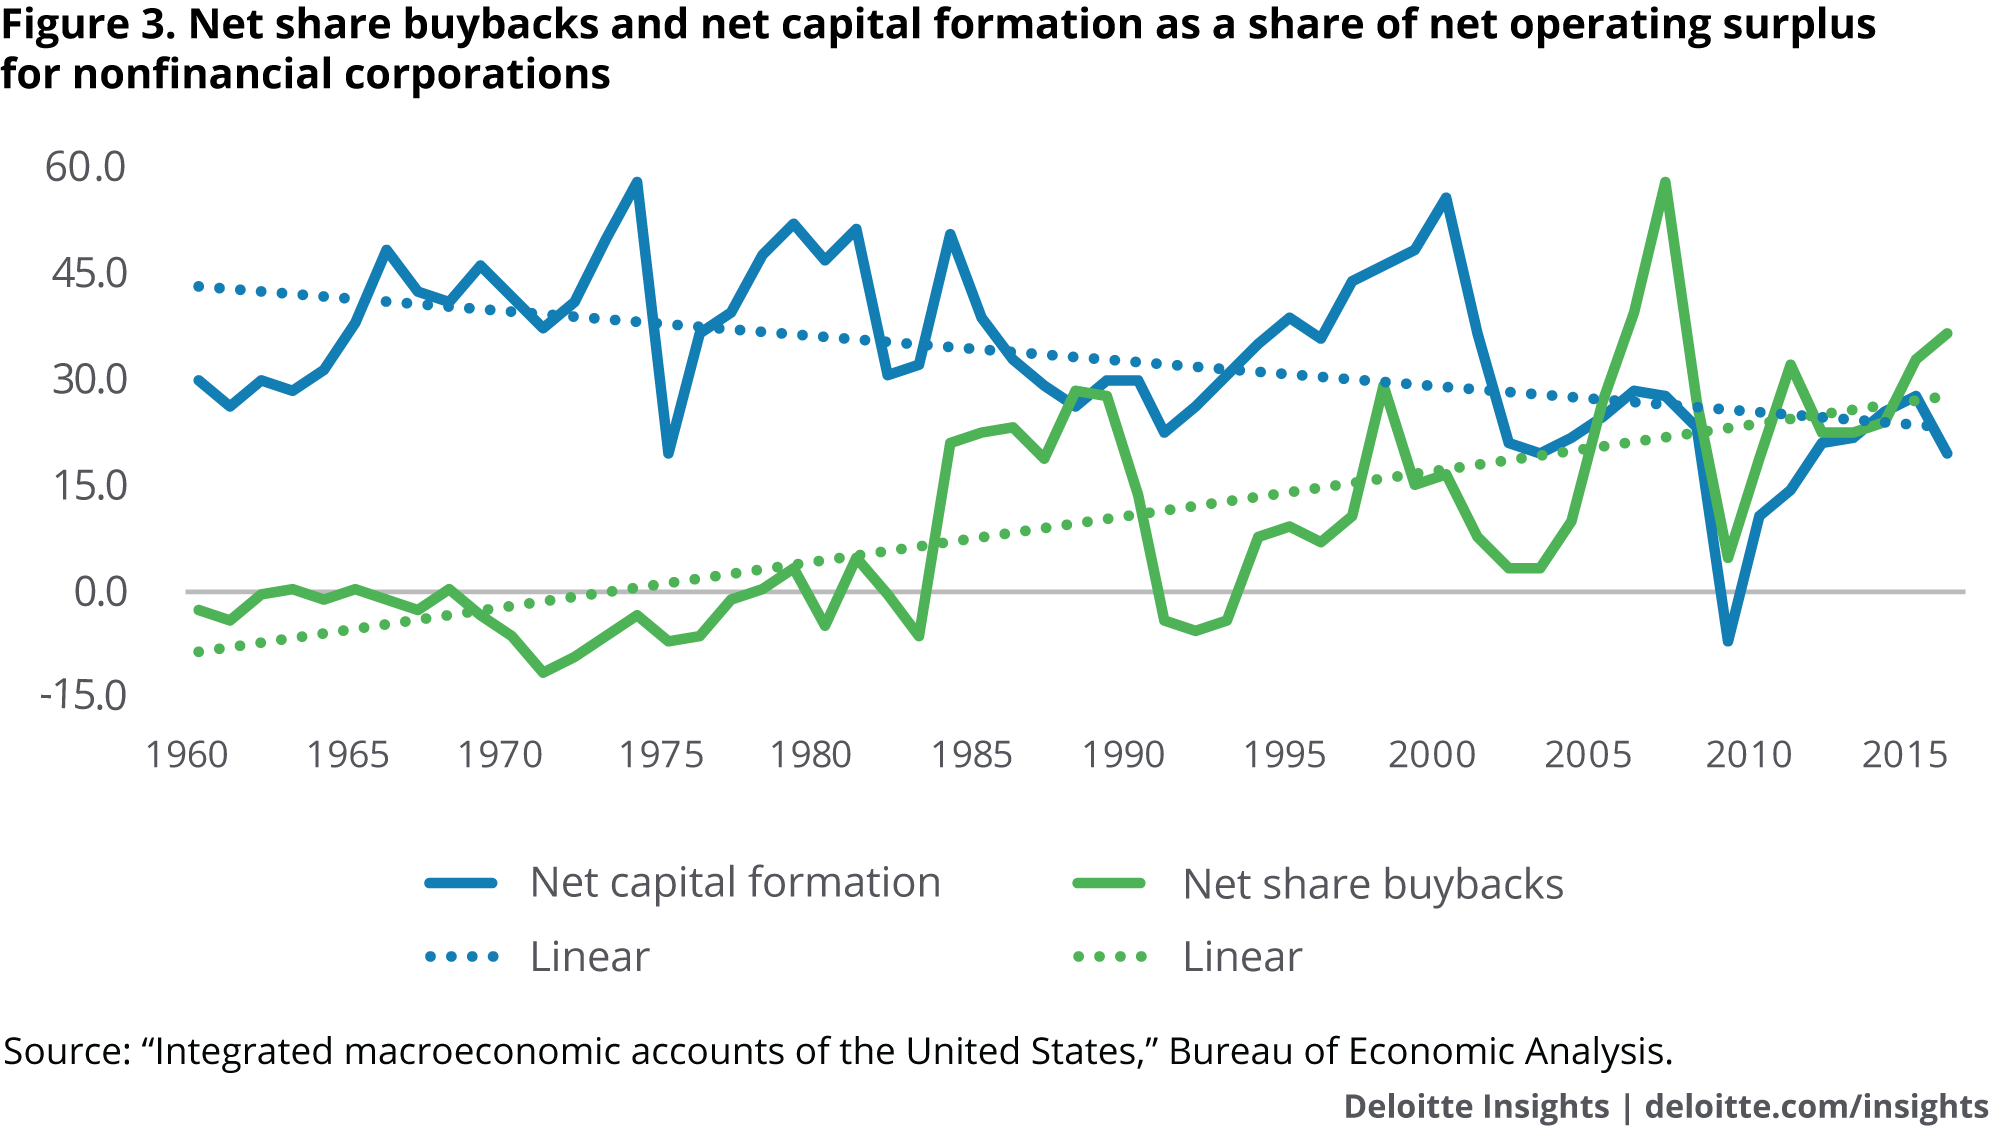 Net share buybacks and net capital formation as a share of net operating surplus for nonfinancial corporations